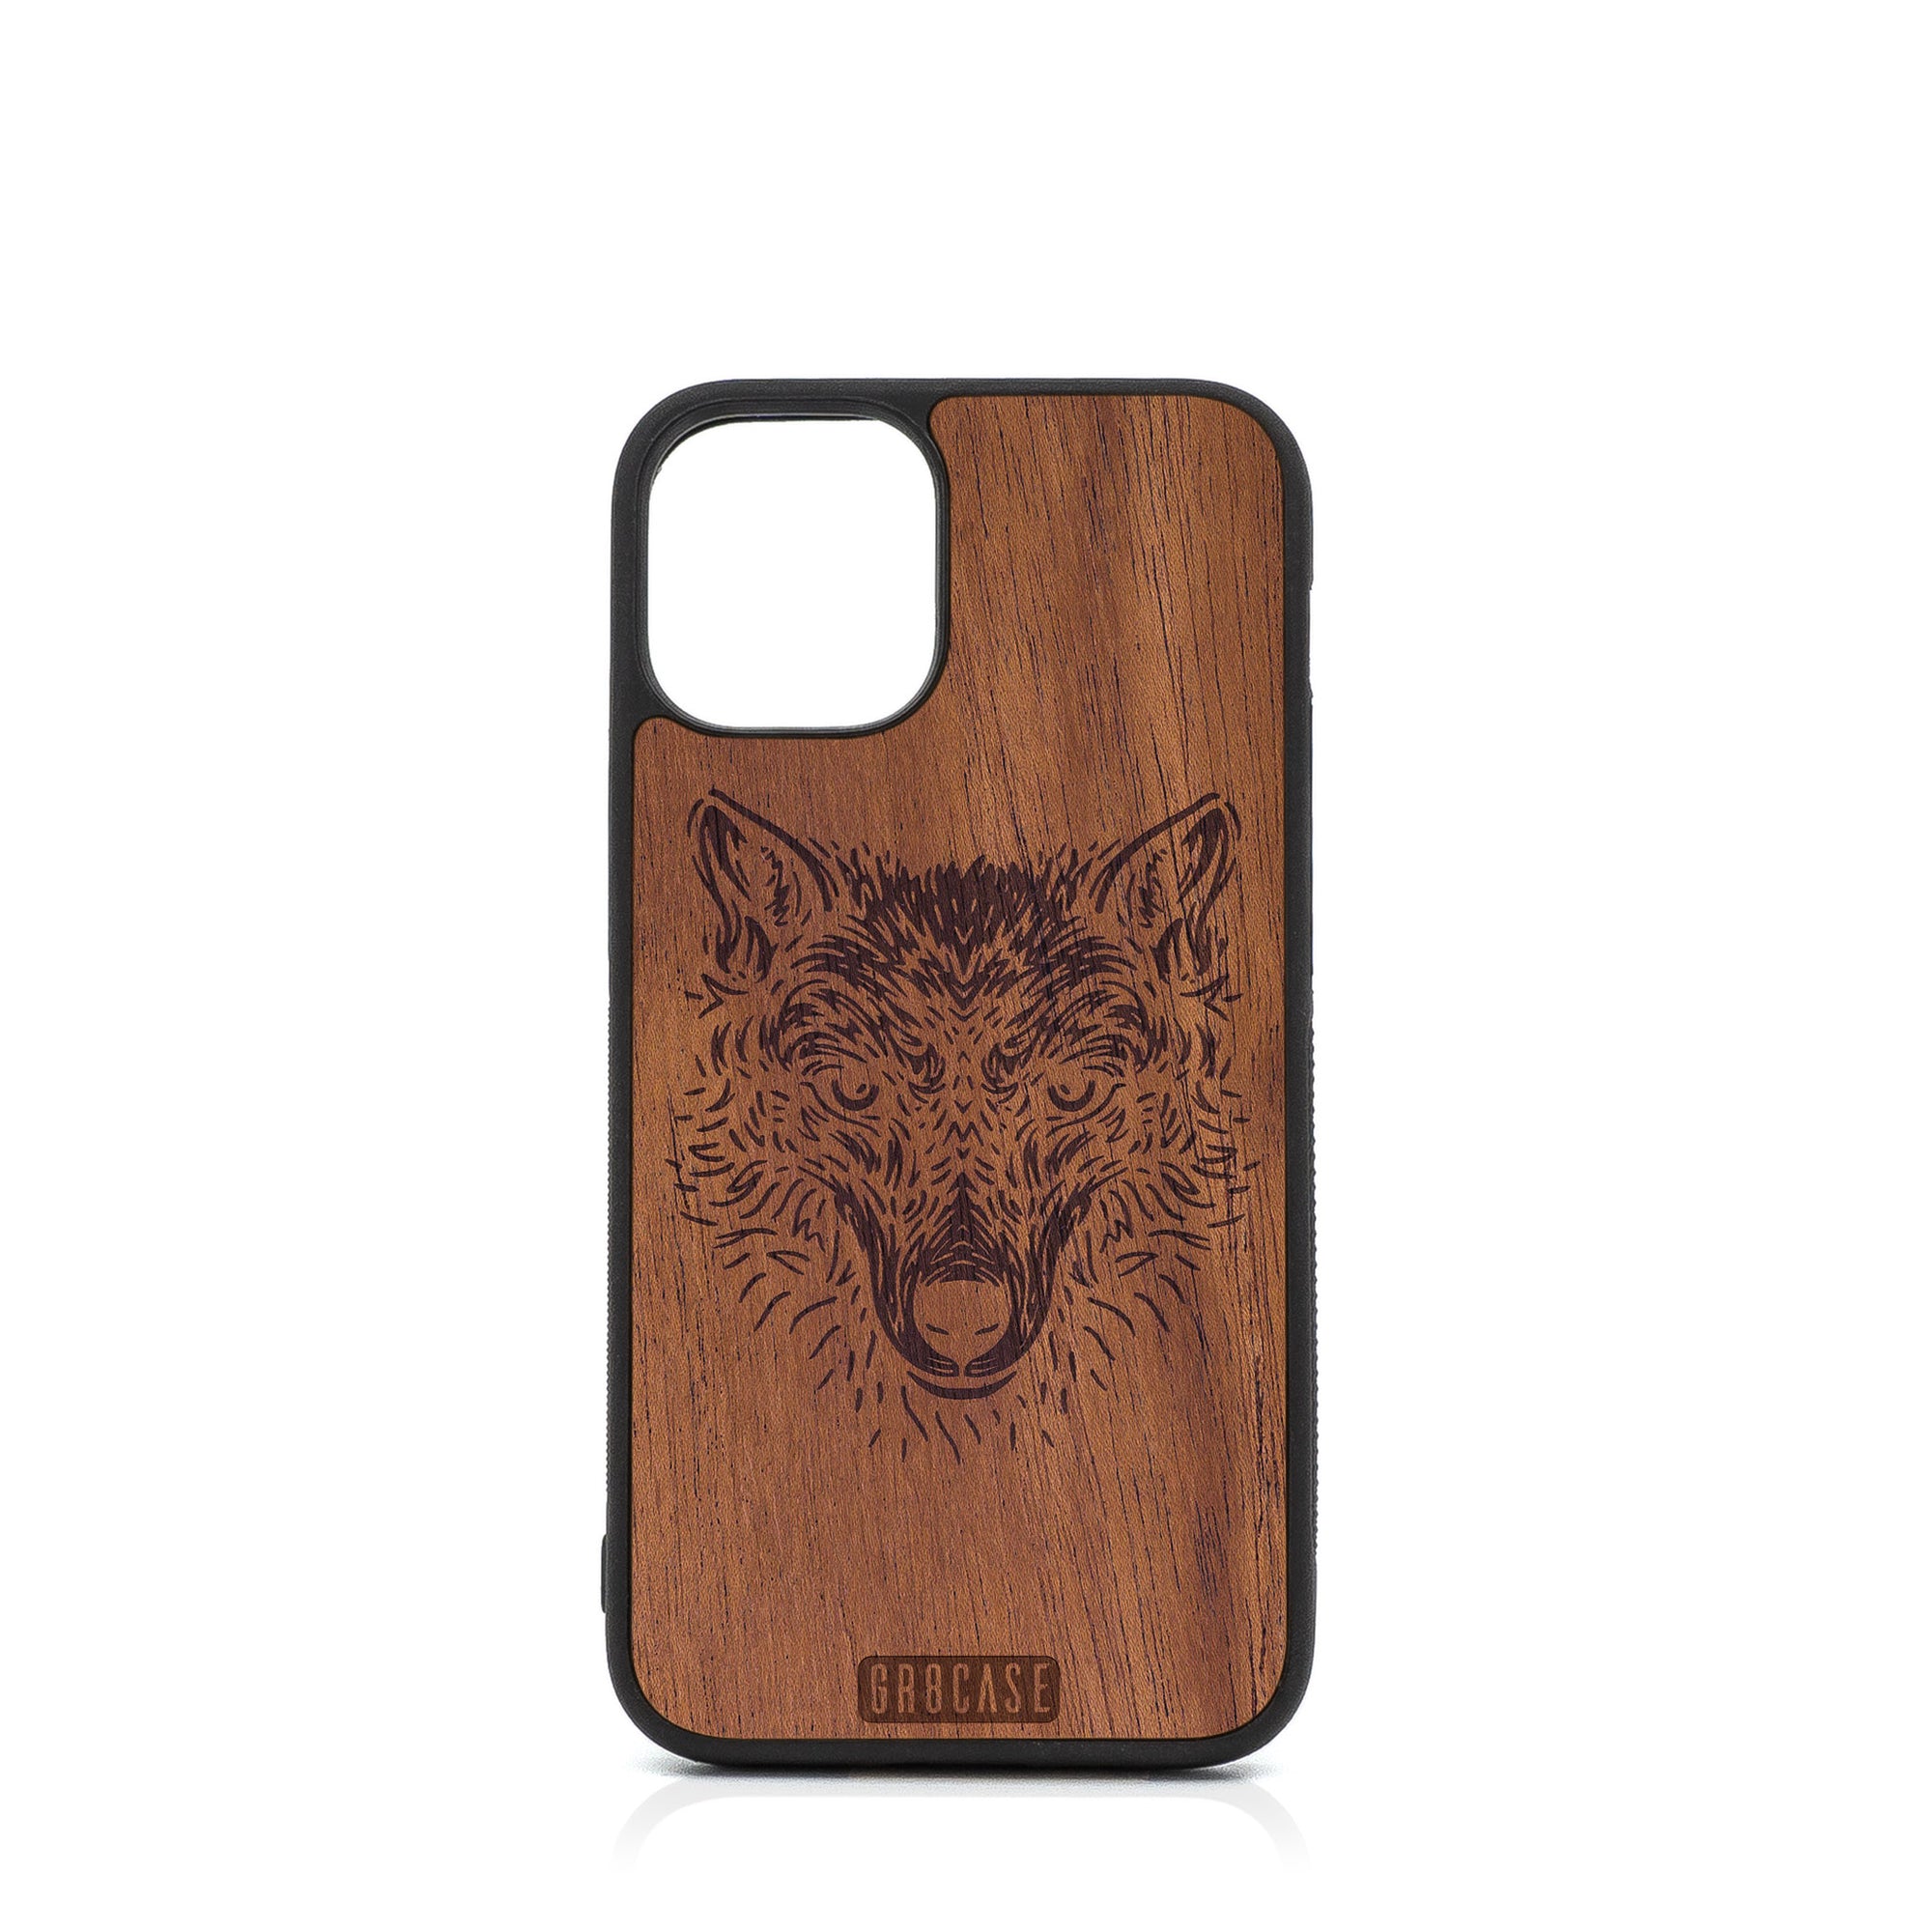 Furry Wolf Design Wood Case For iPhone 12 Mini